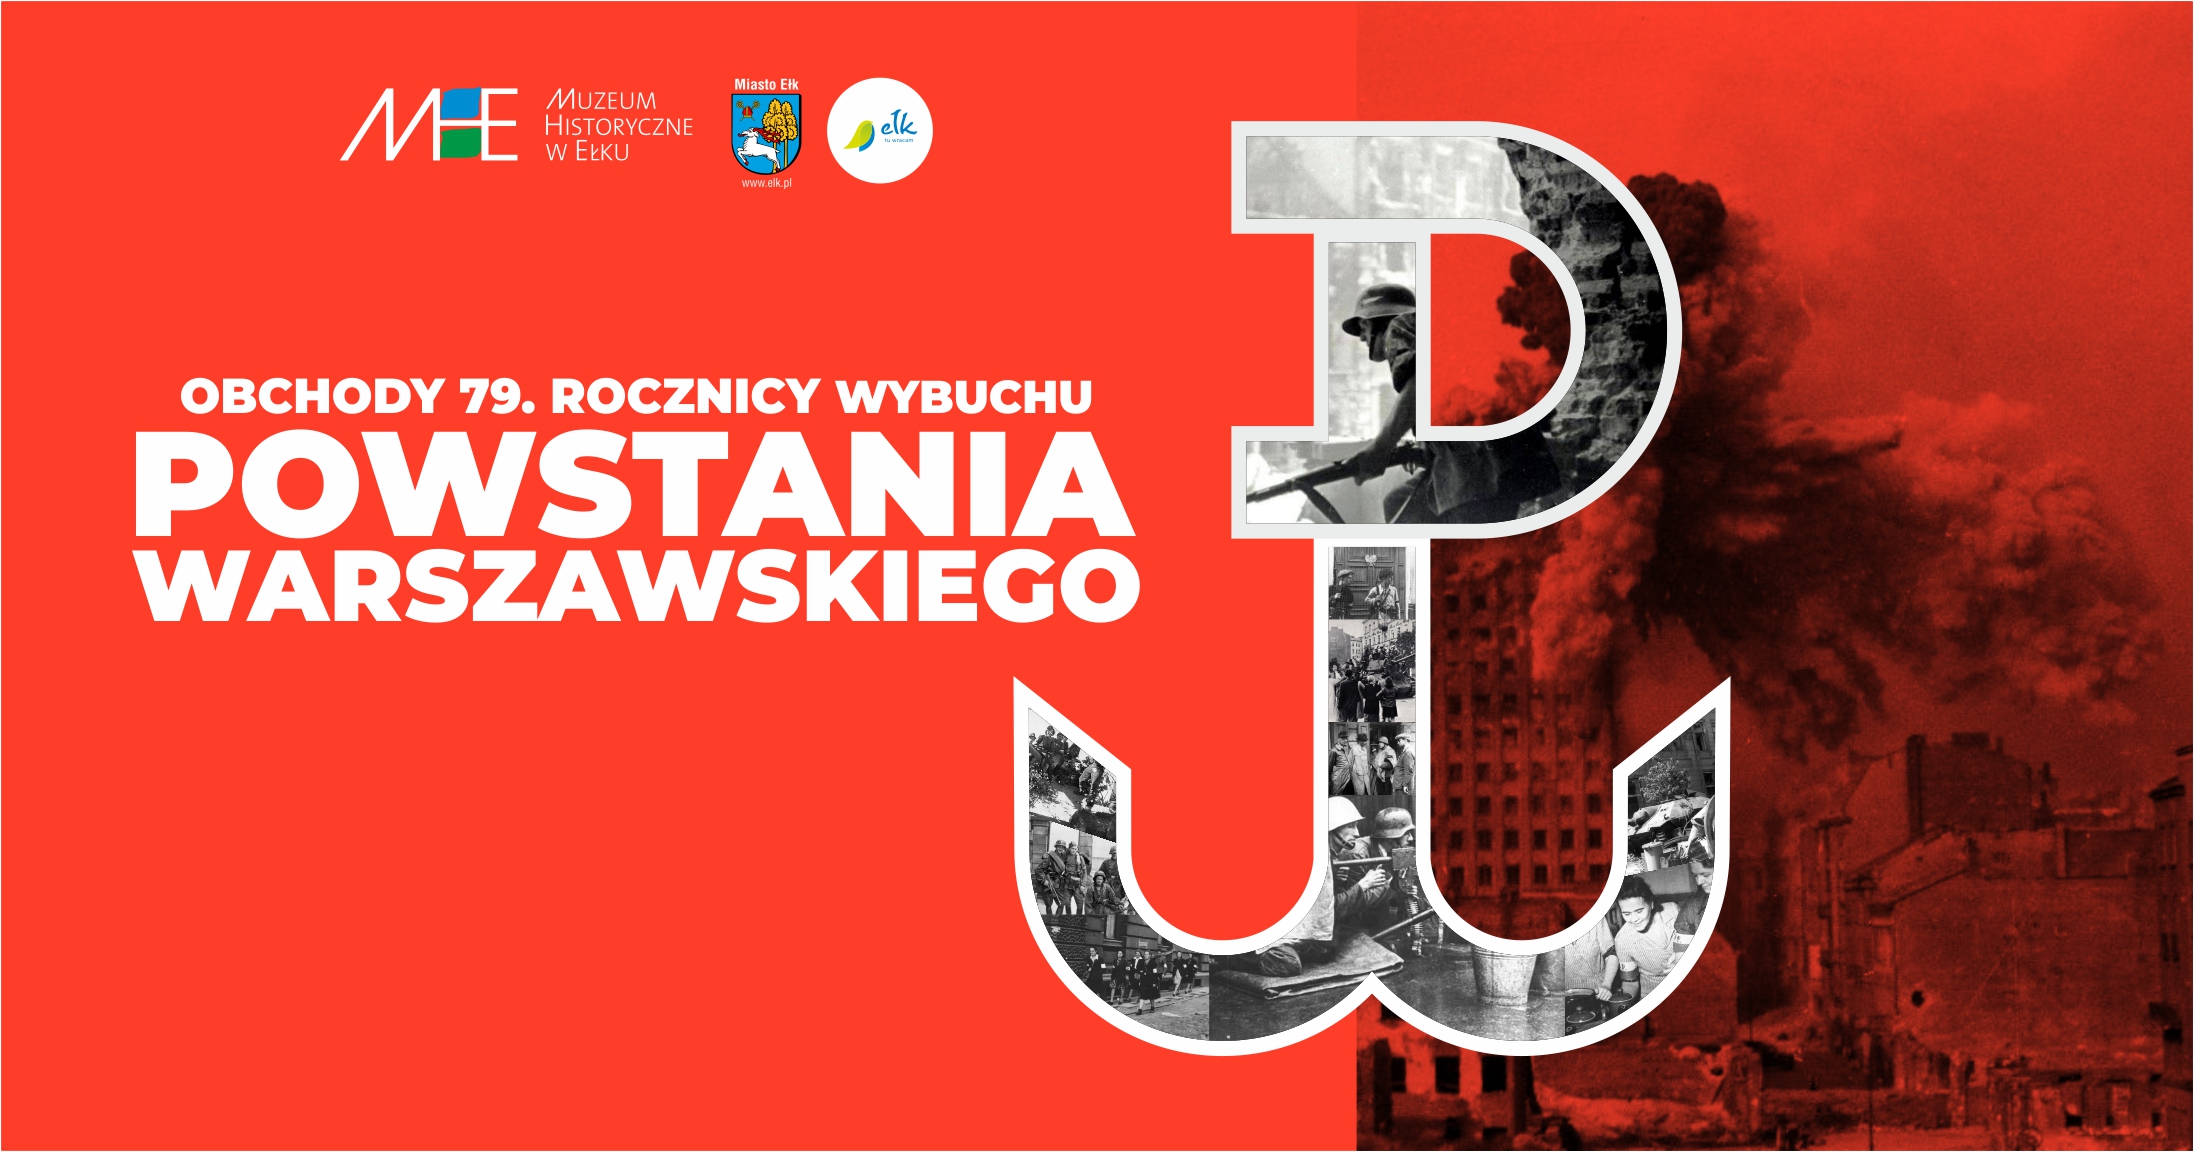 79th anniversary of the outbreak of the Warsaw Uprising